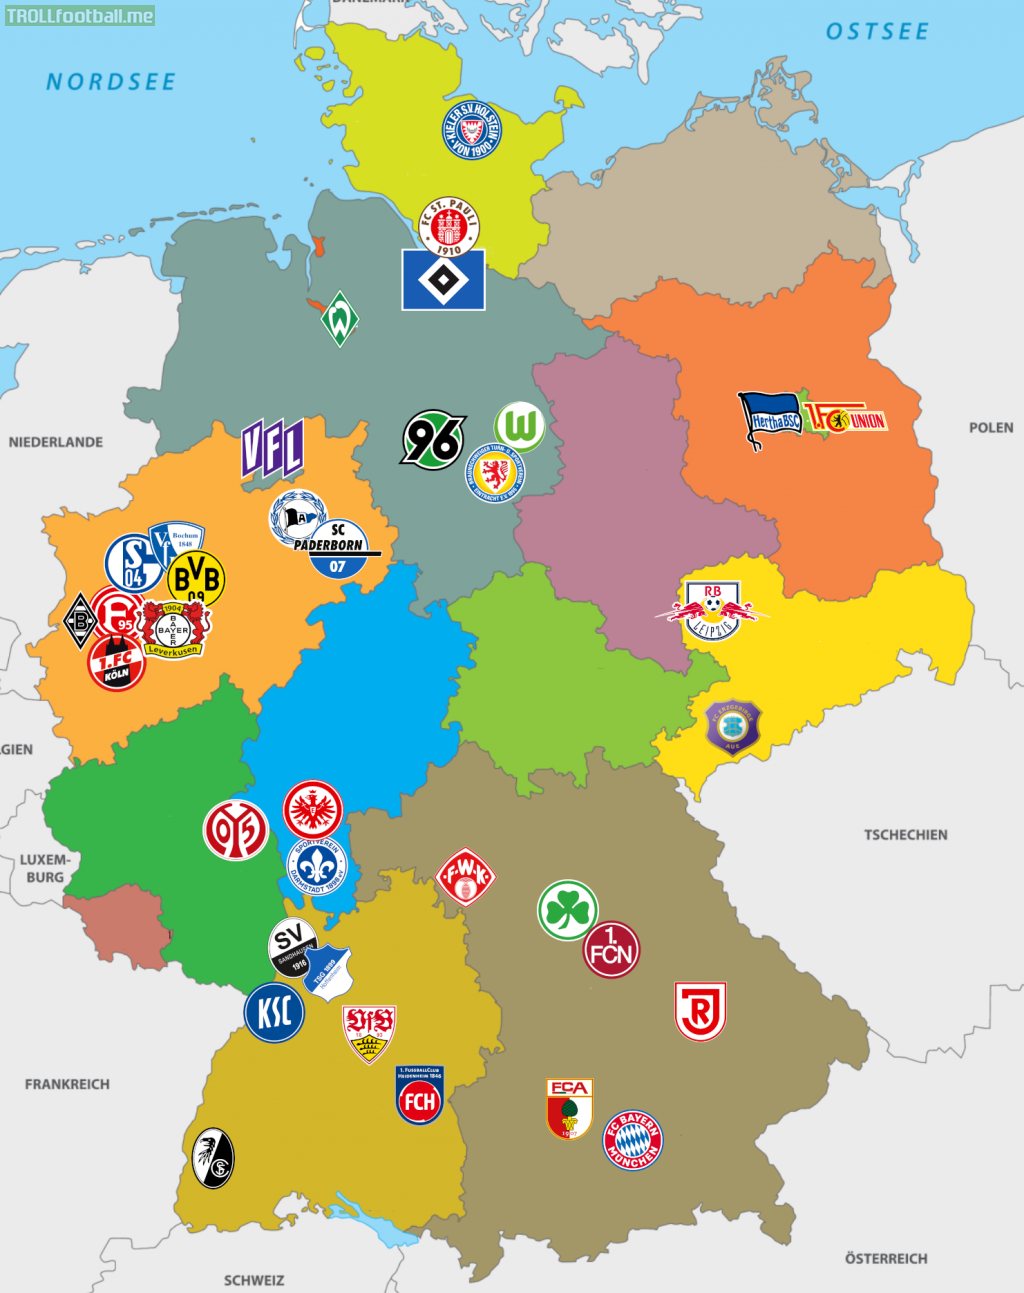 I made a map with all the teams from the 1st and 2nd Bundesliga for the 20/21 season